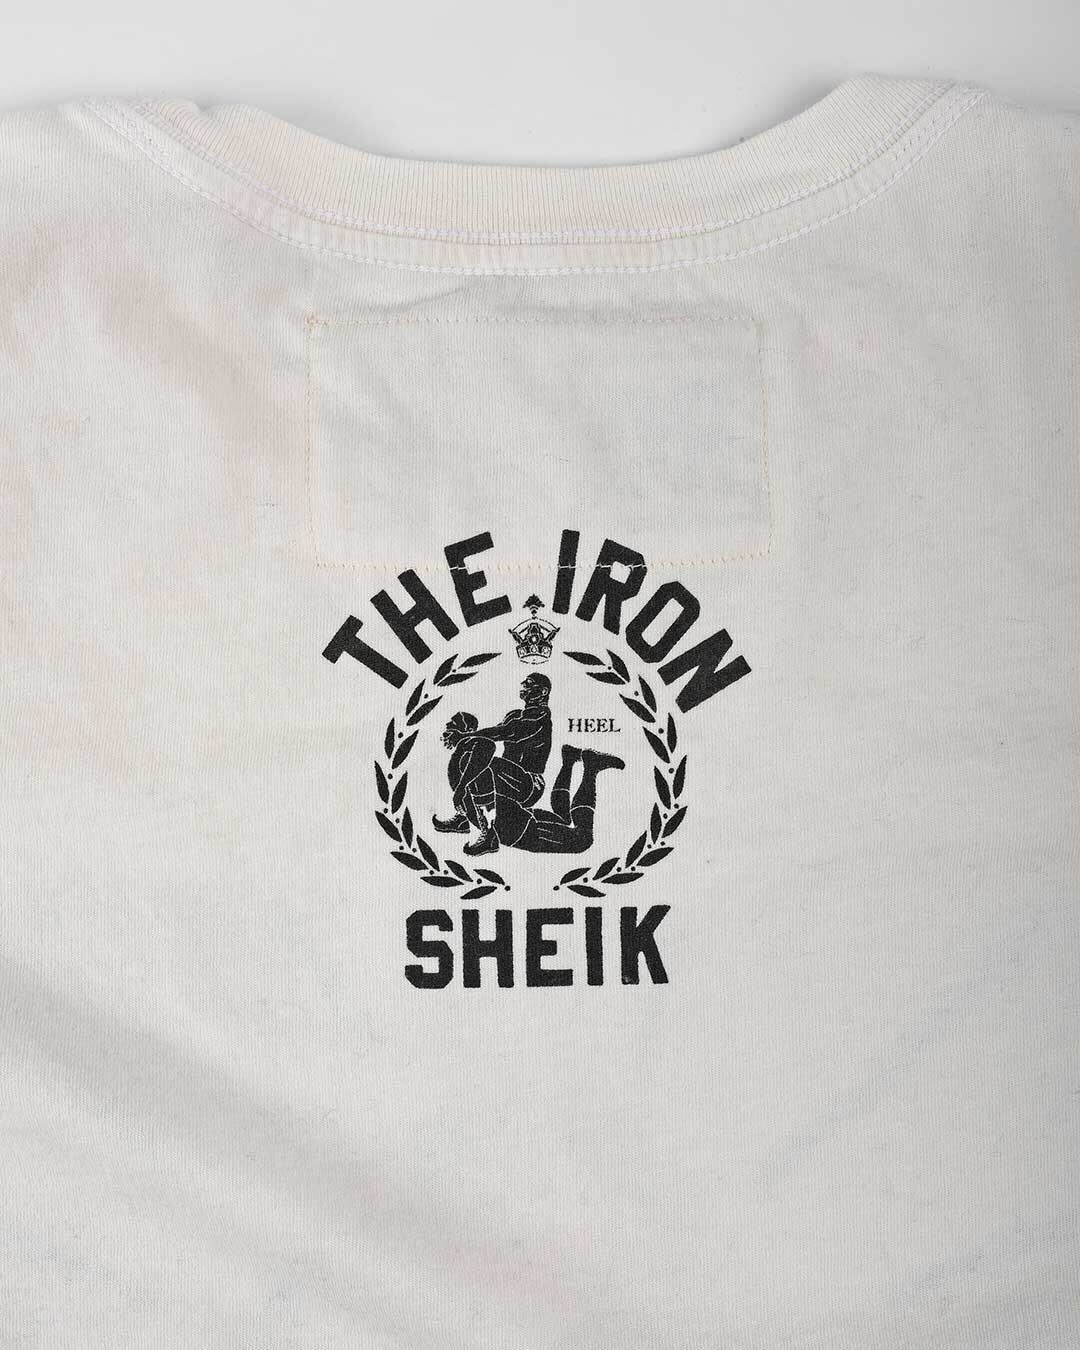 The Iron Sheik Heel Photo Tee - Roots of Fight Canada